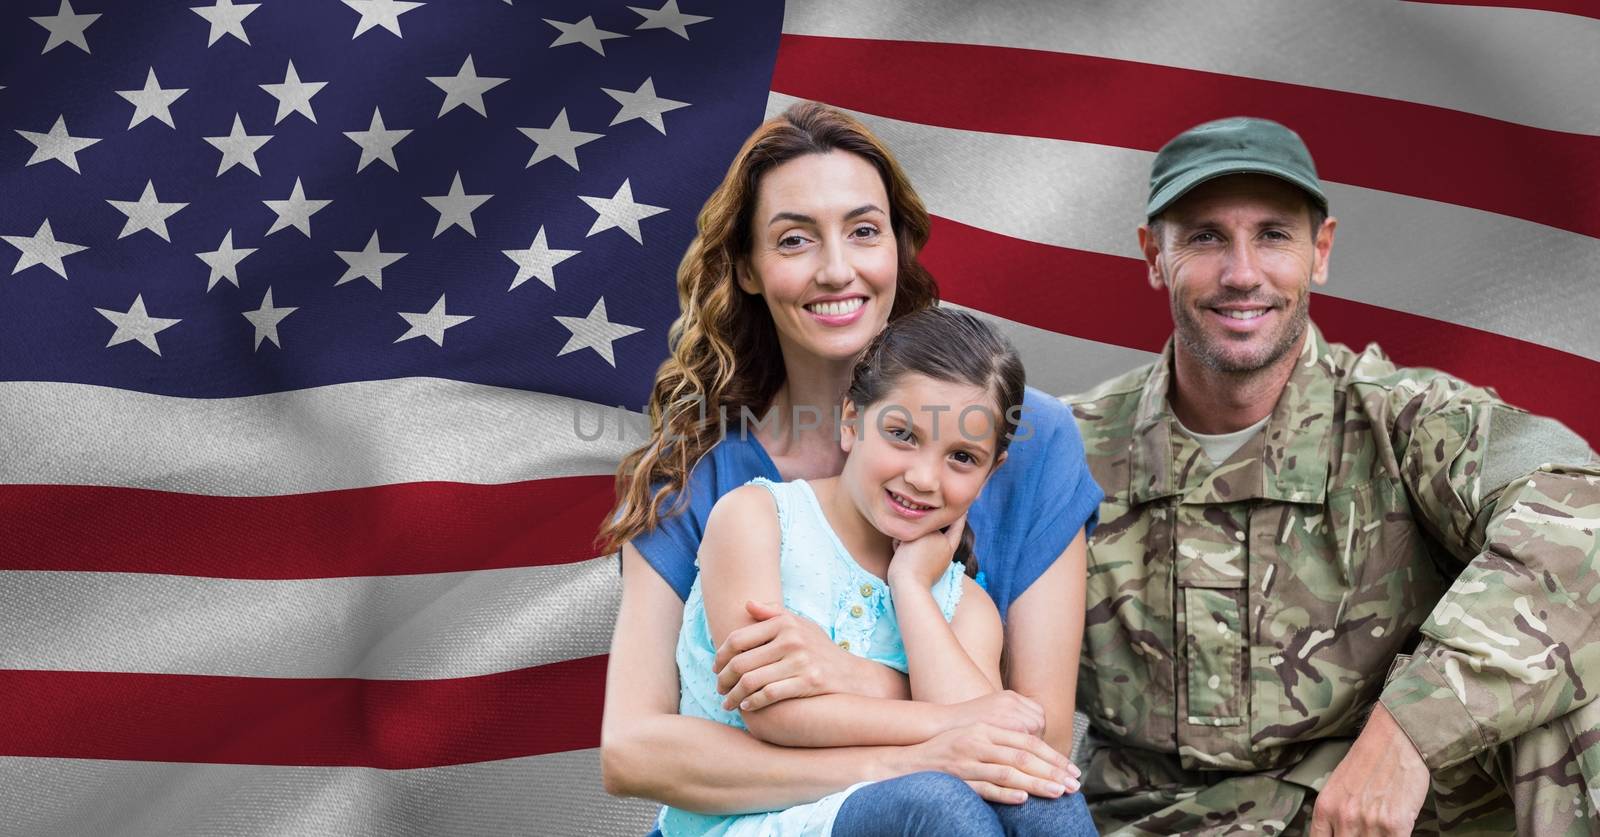 Soldier reunited with his family by Wavebreakmedia